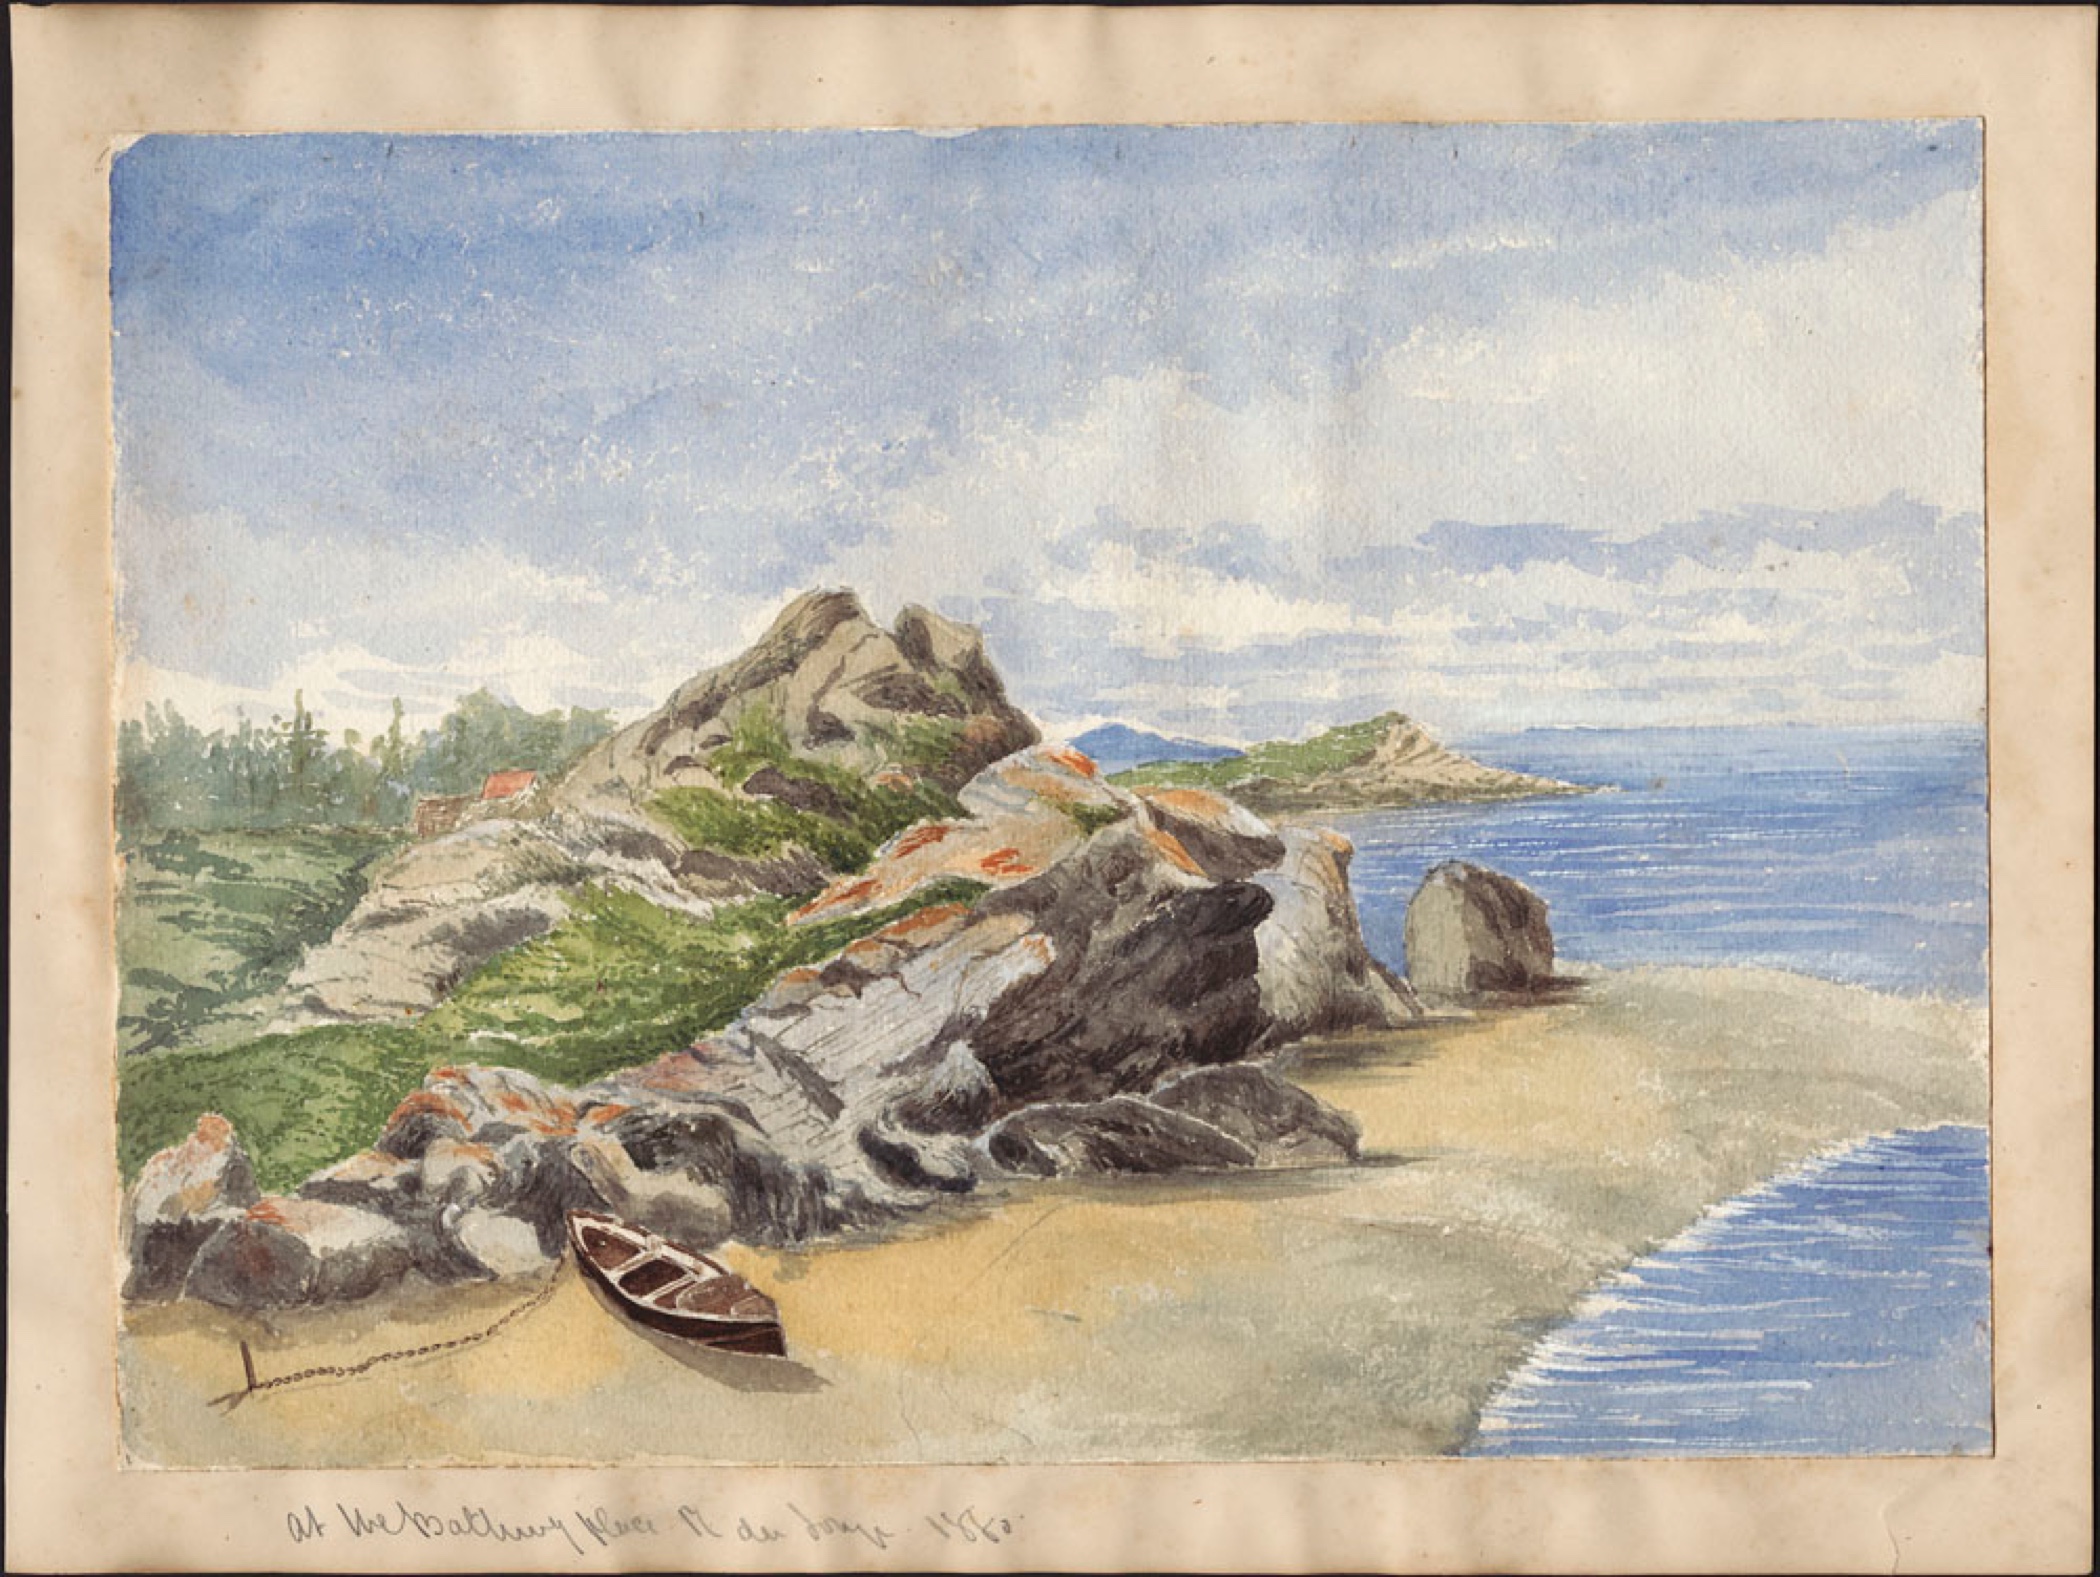 A vibrant watercolour depicting a riverside view looking lengthwise instead of across the river, a rocky outcropping looming over a sandy beach where a canoe is tethered. There are trees in the distance, and undulating clouds.